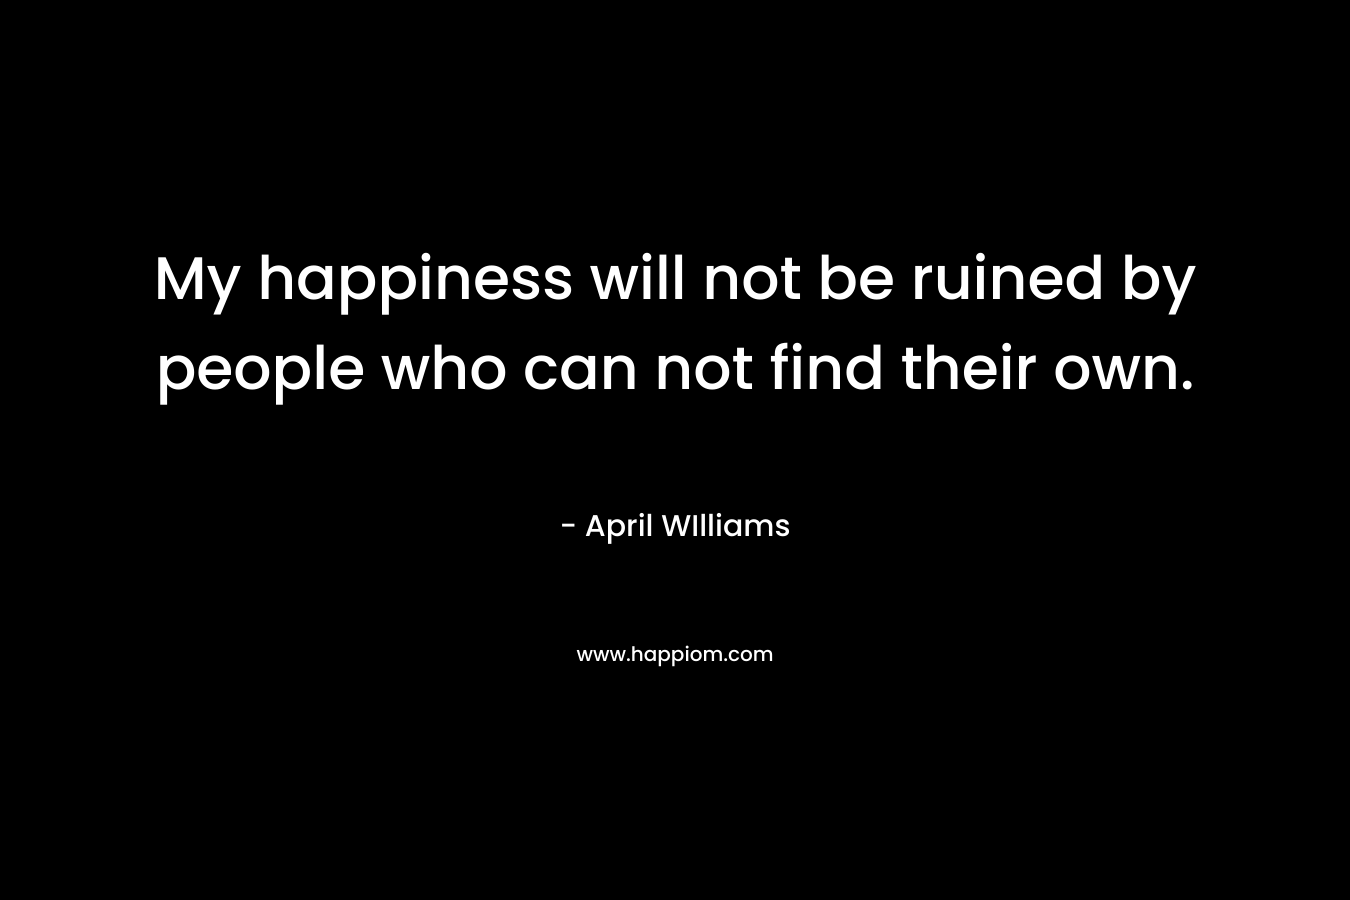 My happiness will not be ruined by people who can not find their own.